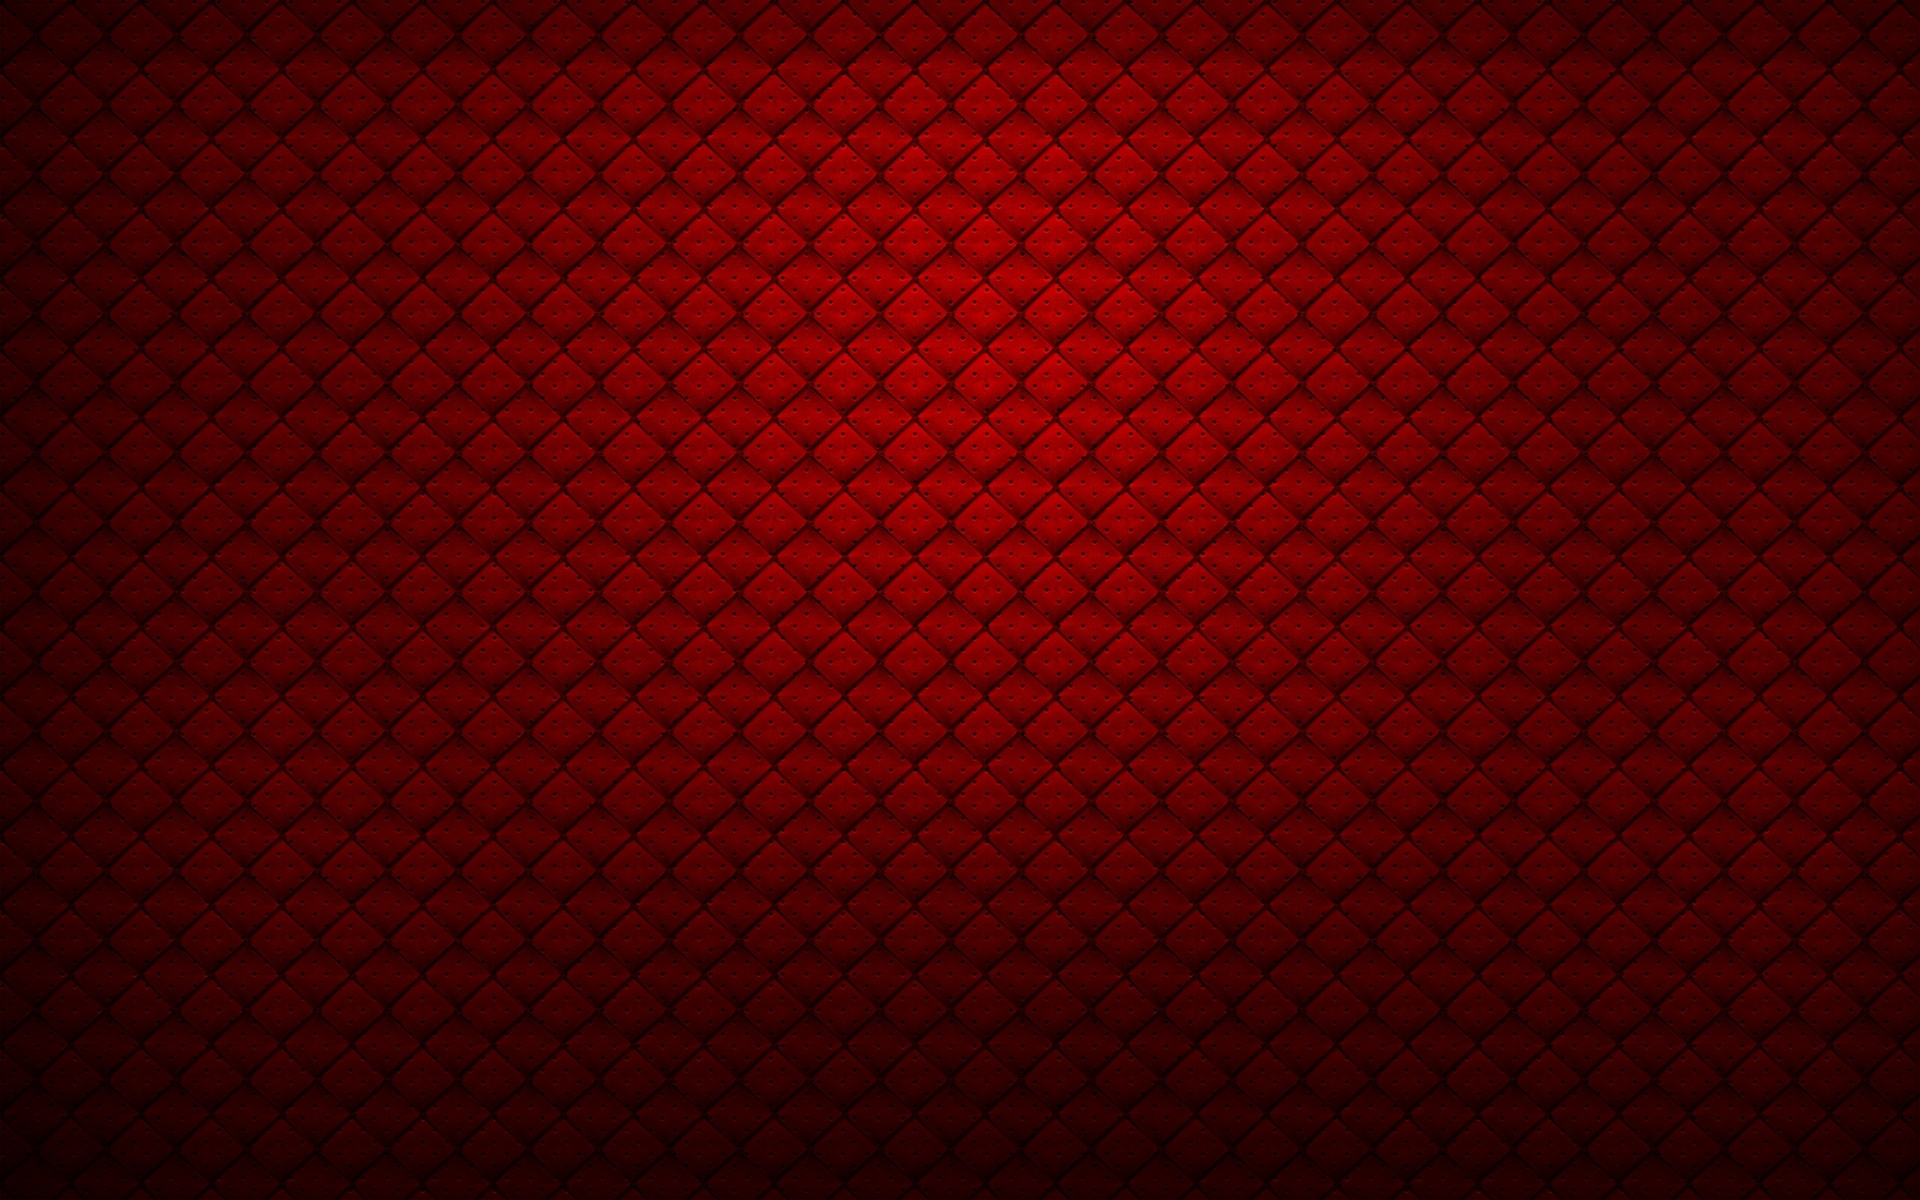 Red Still Image High Quality In HD Wallpaper Free Download